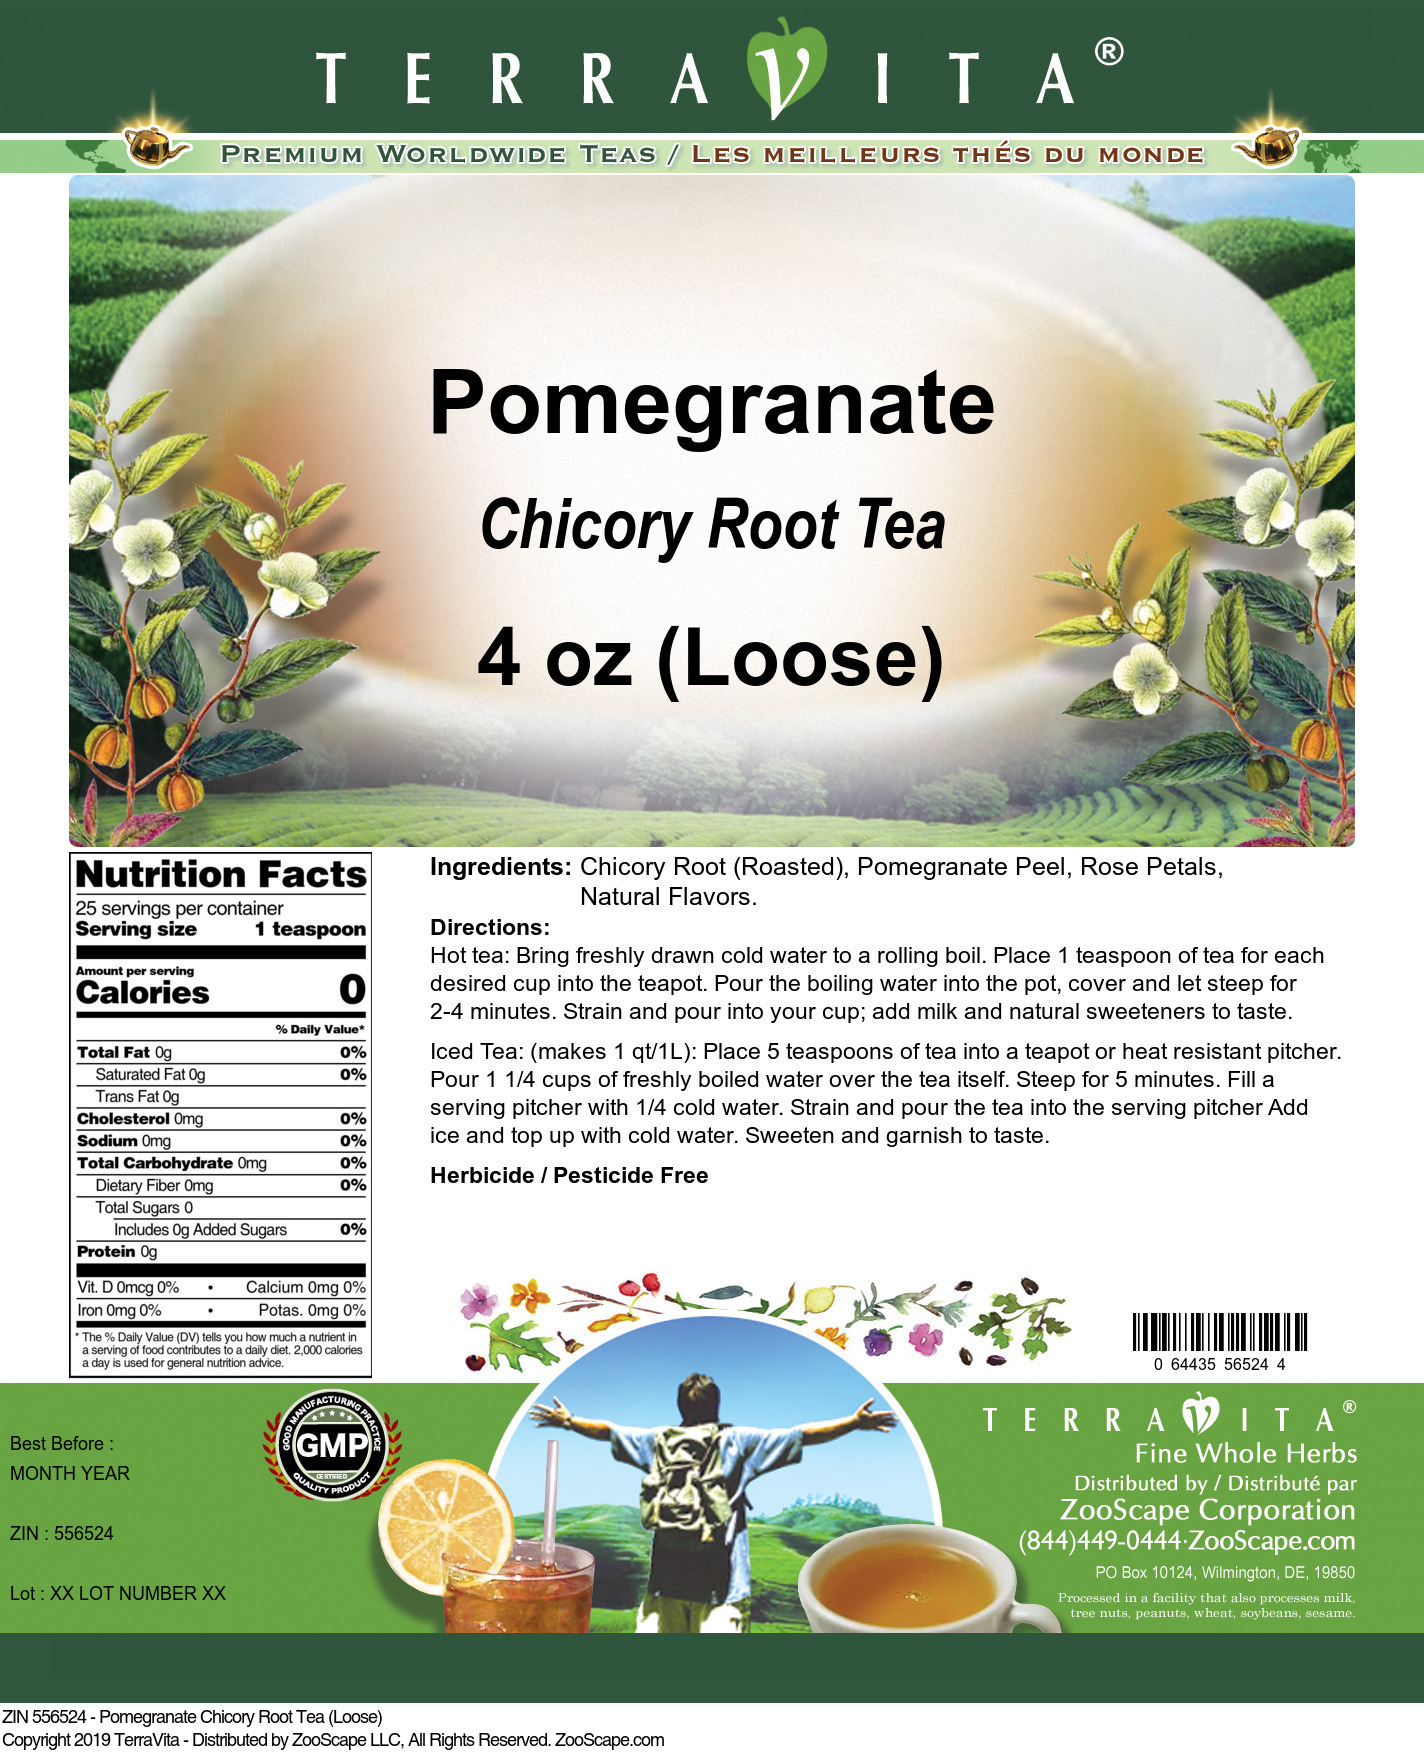 Pomegranate Chicory Root Tea (Loose) - Label